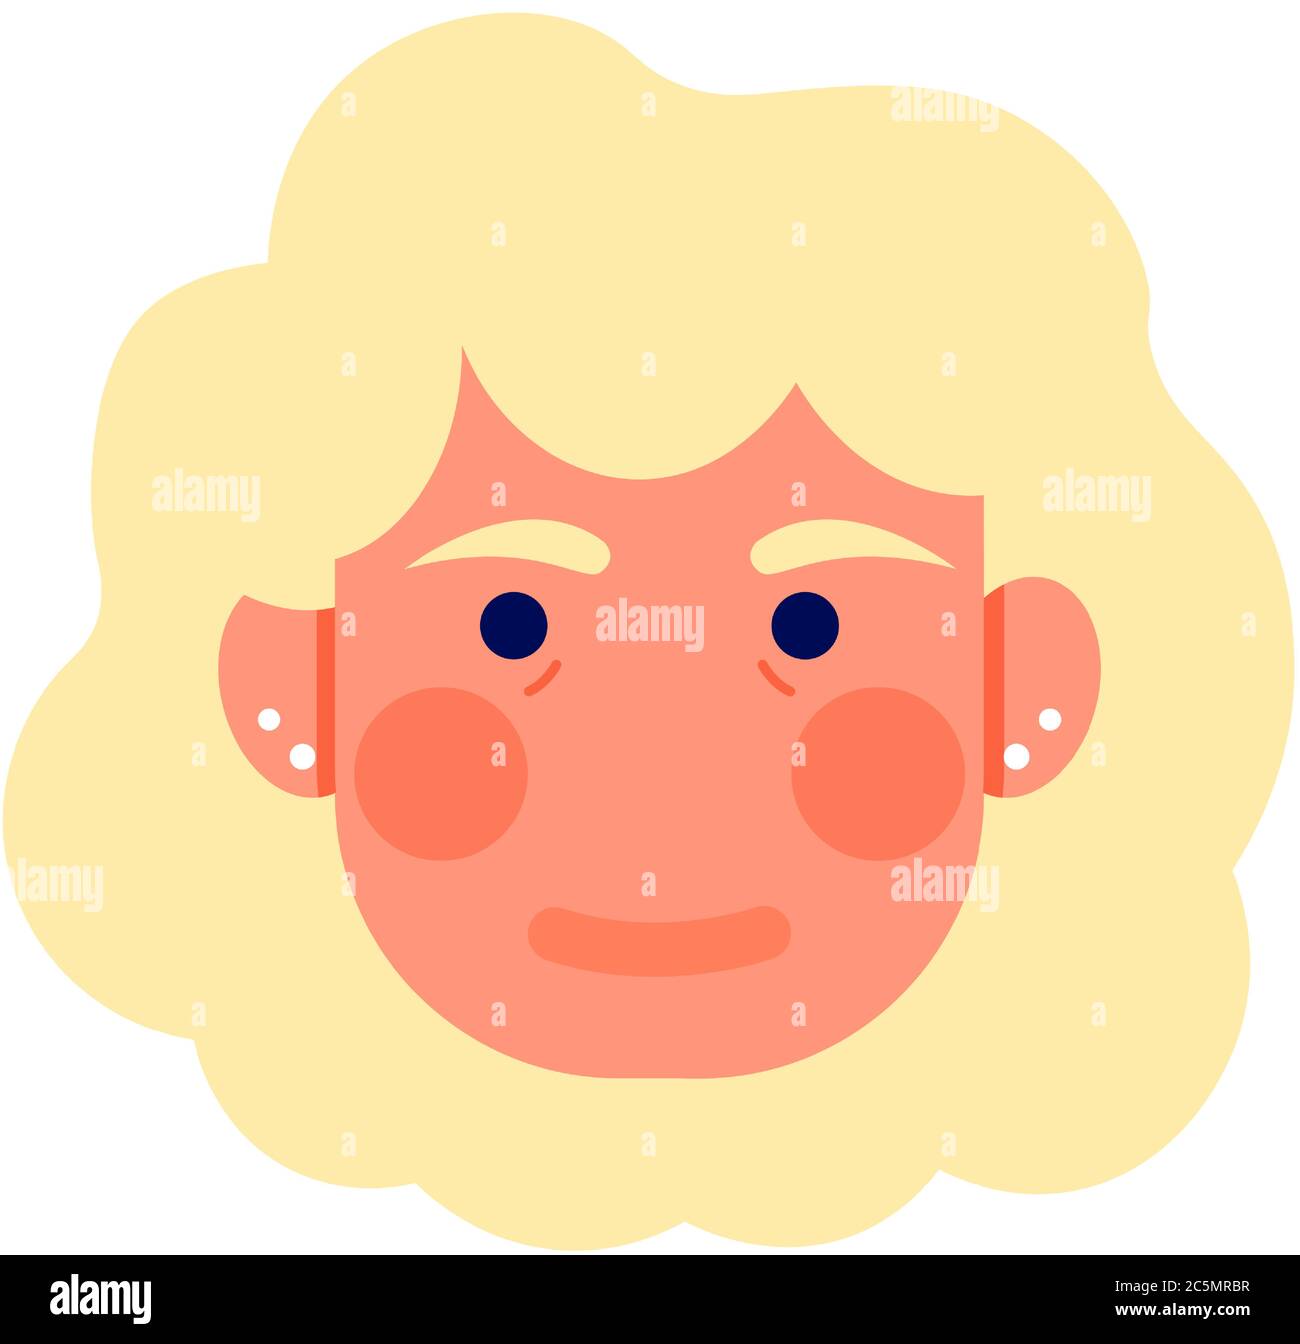 Face expressions of woman with blond hair. Vector illustration isolated on white background. Stock Vector